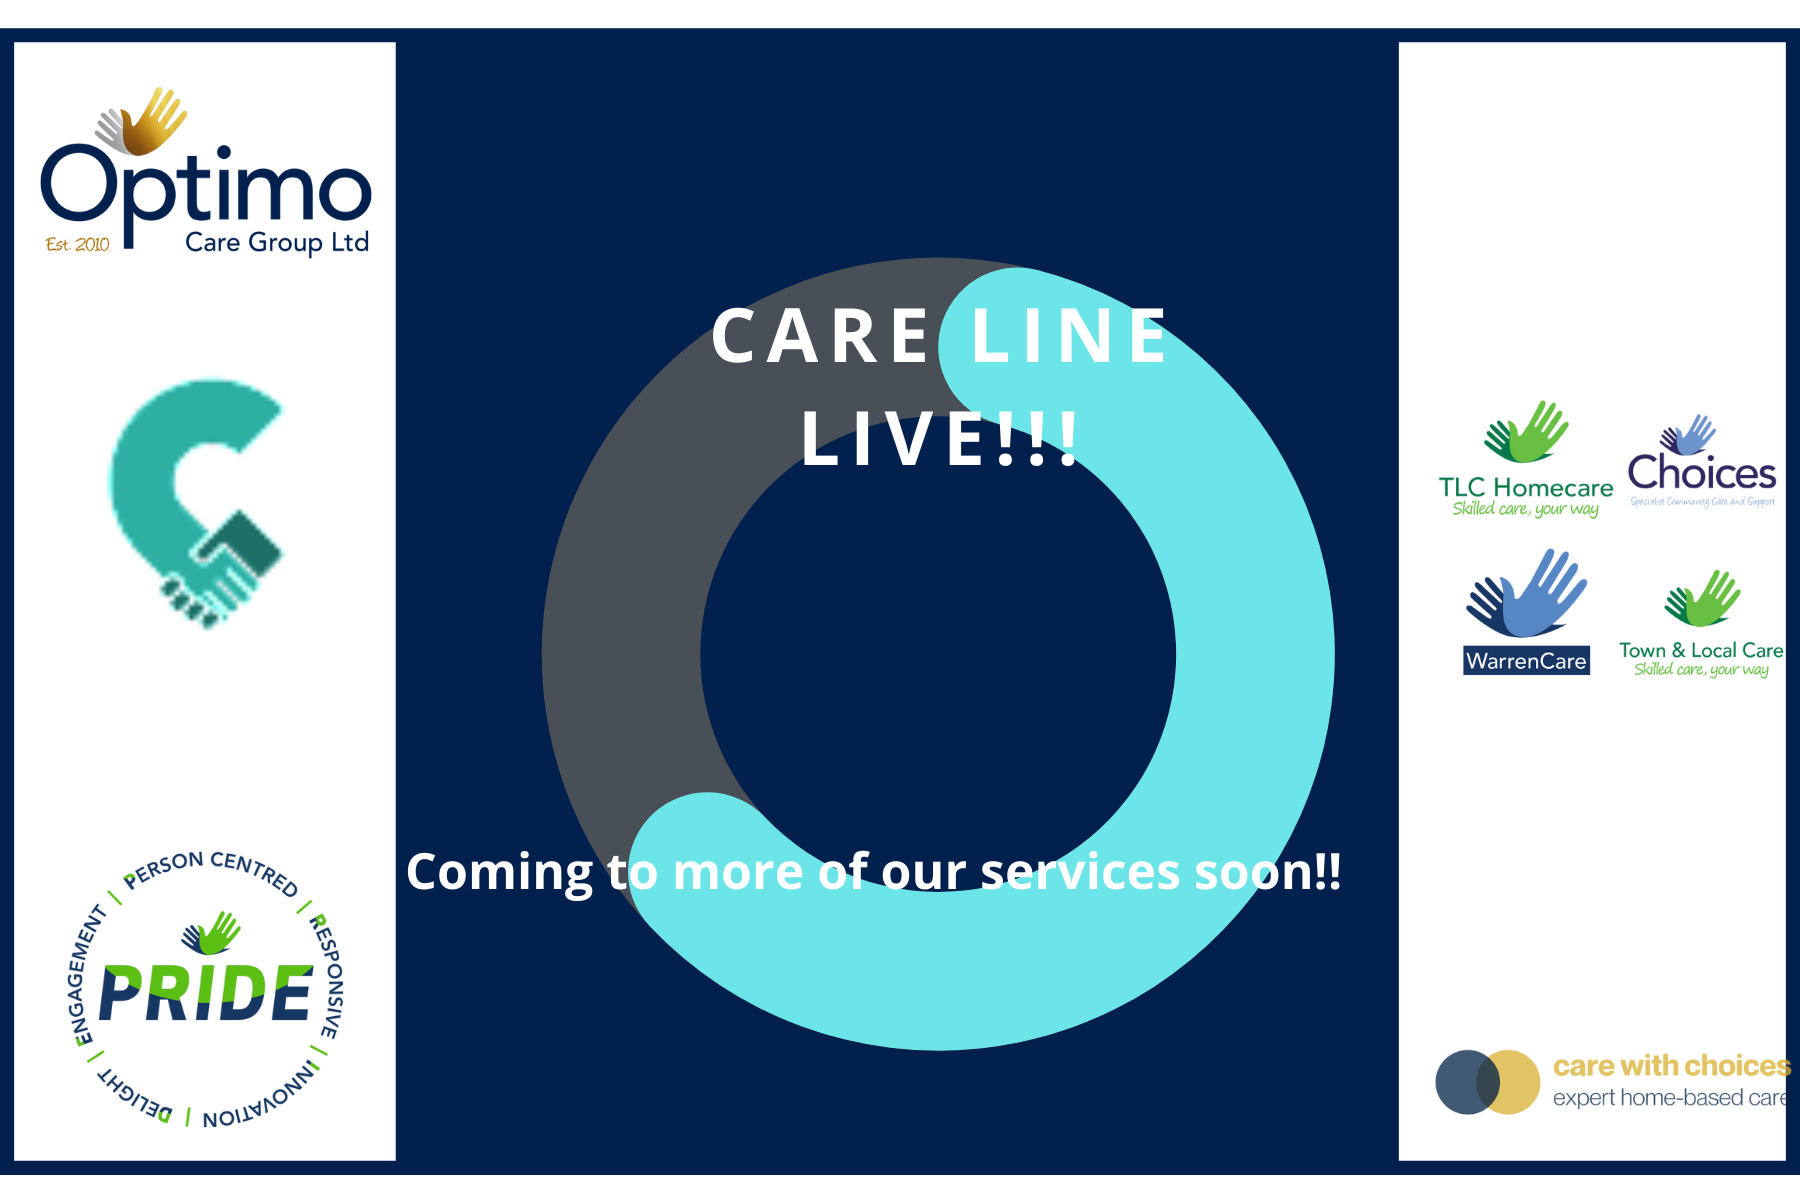 ‘CARE LINE LIVE’ – Coming to More of Our Services Soon!!!